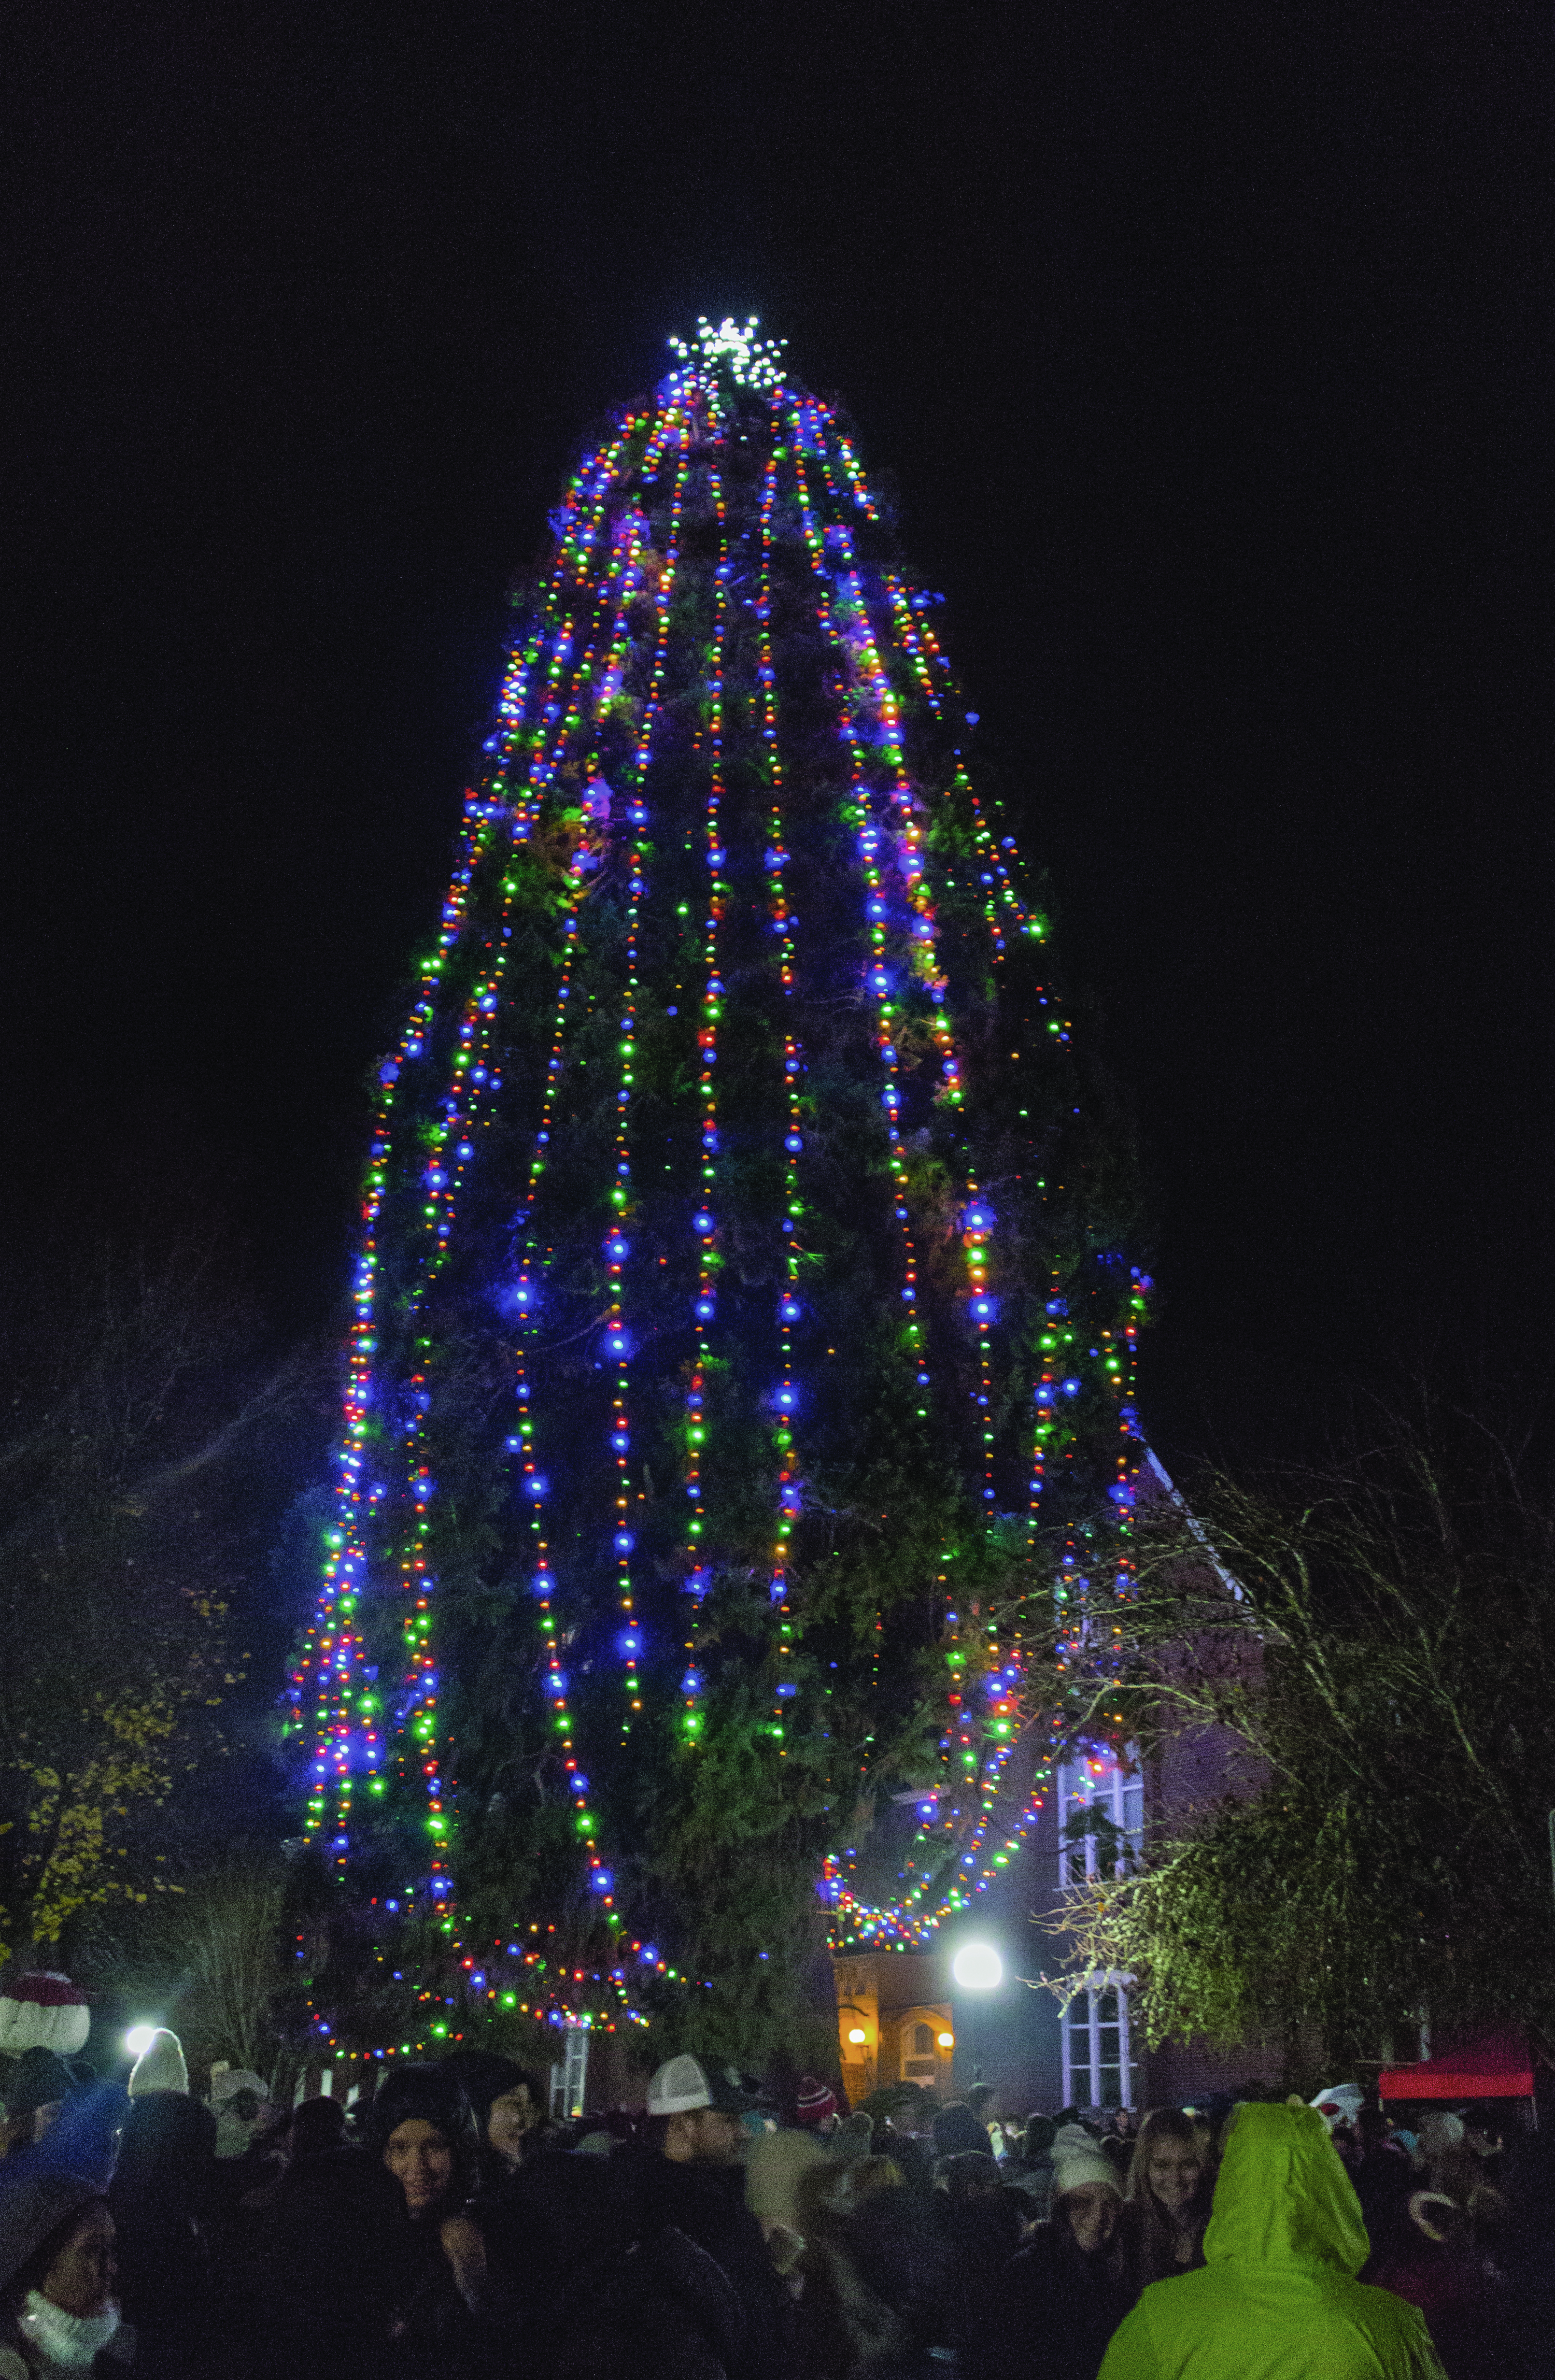 All is bright: Western hosts 51st Annual Holiday Tree Lighting